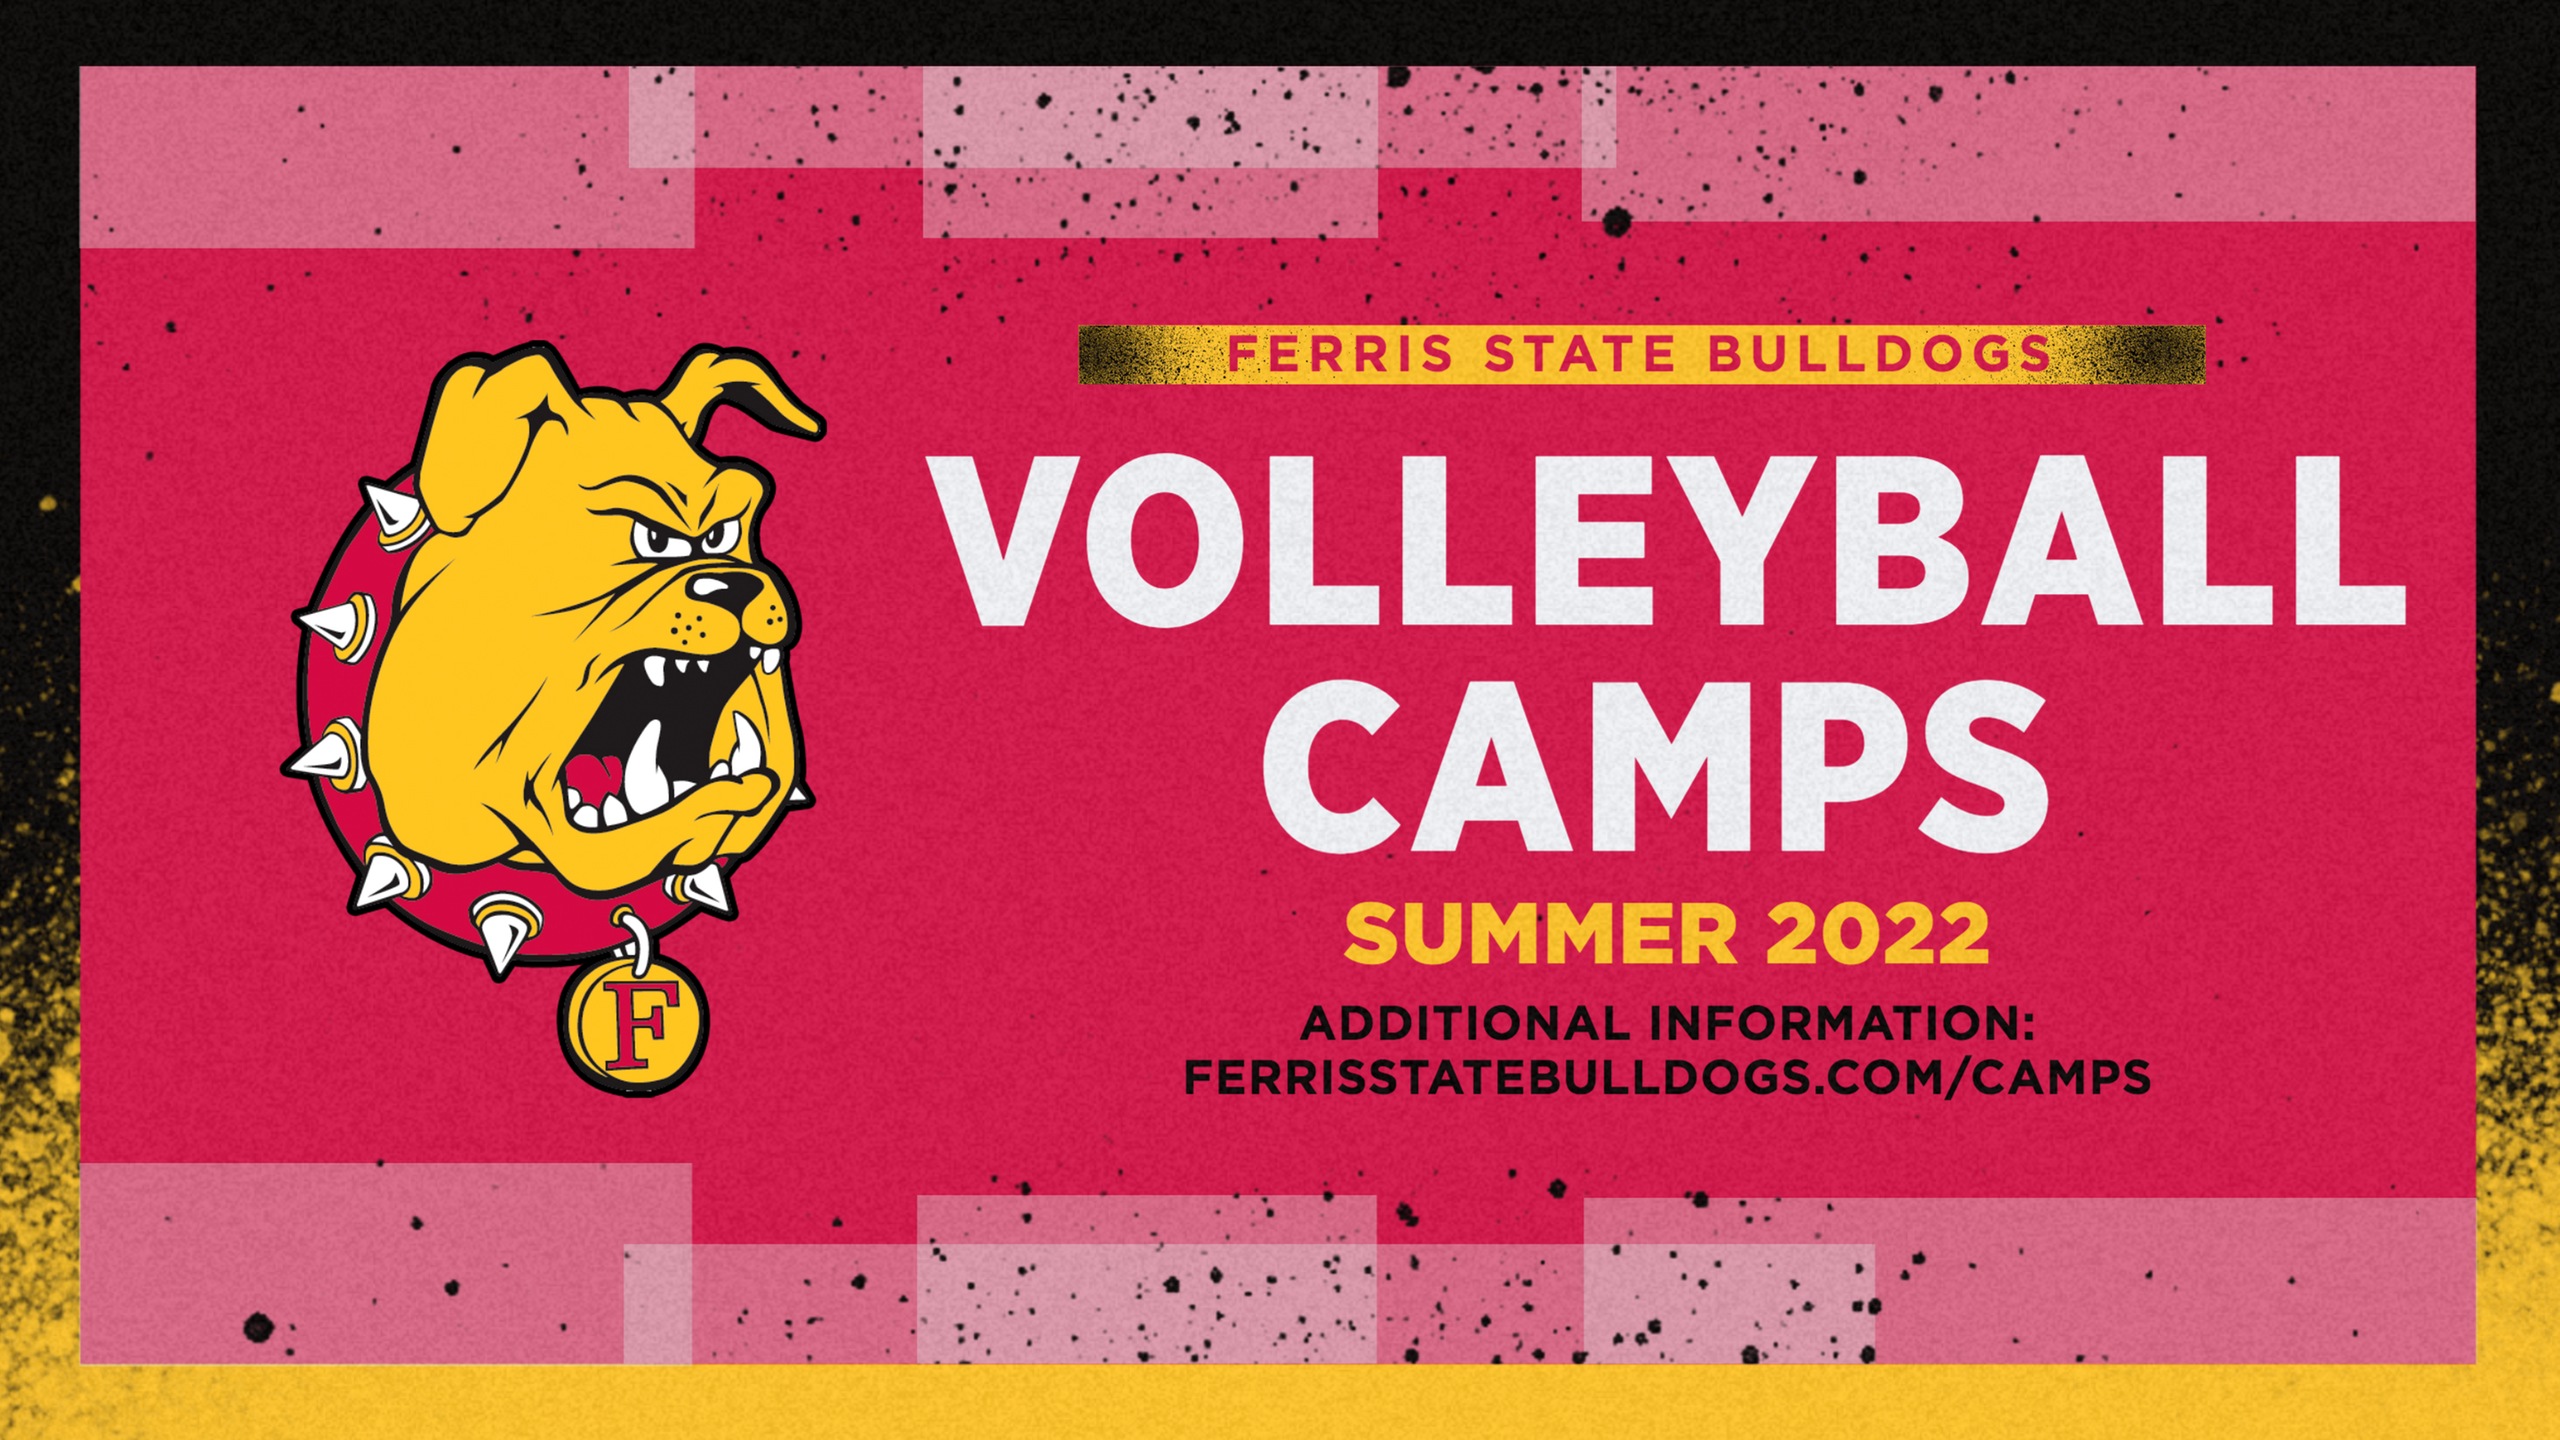 2022 Ferris State Volleyball Summer Camp Dates Announced